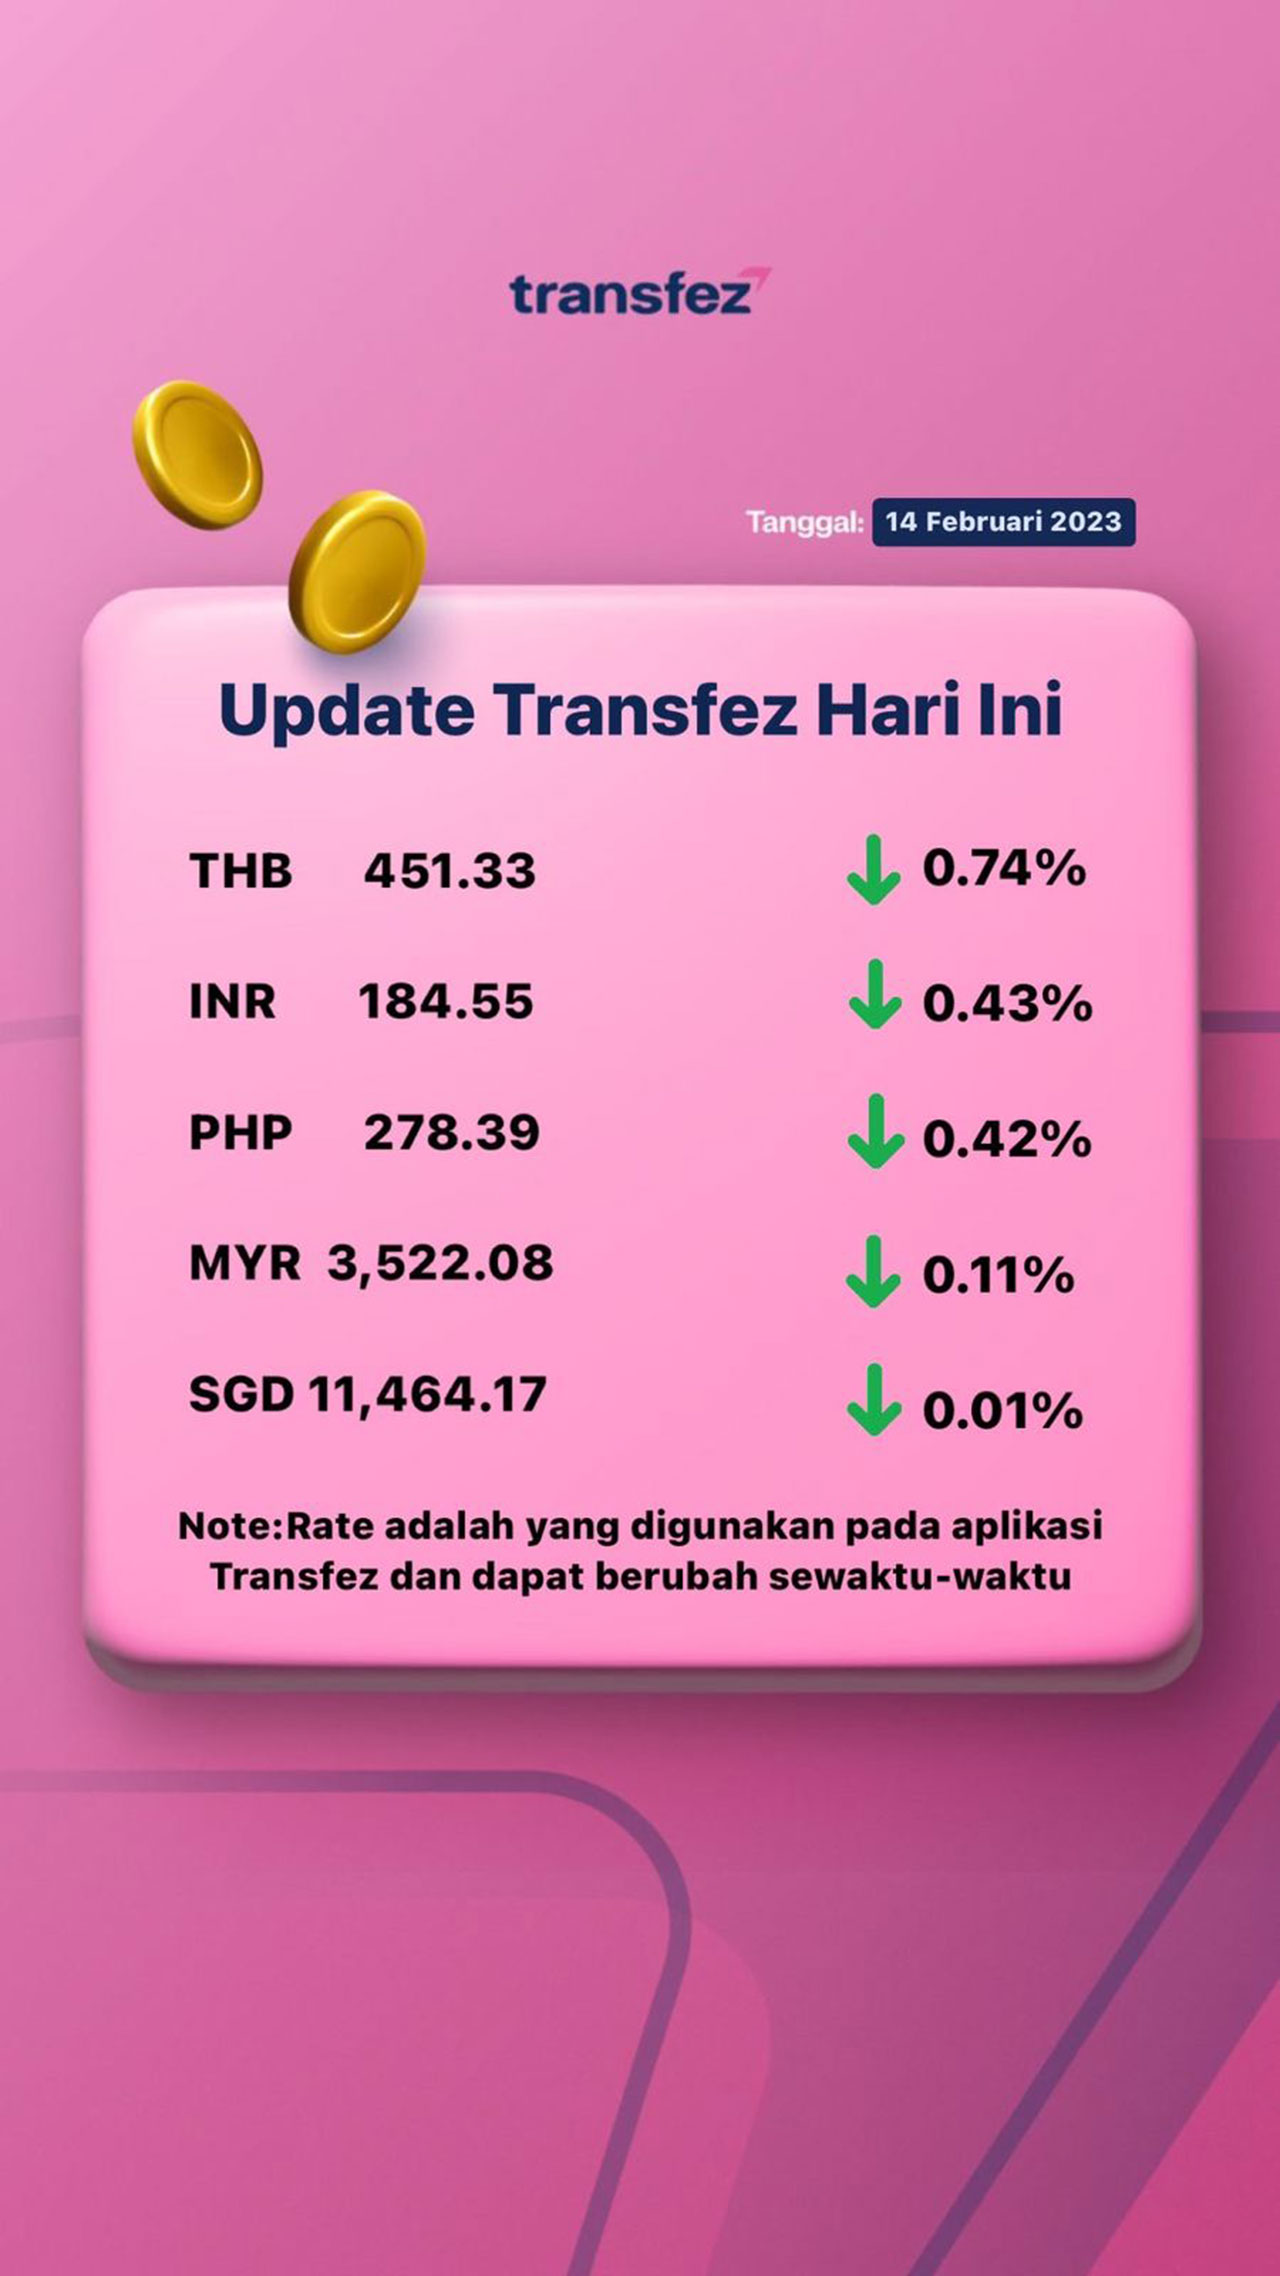 Today's Transfez Rate Update February 14 2023